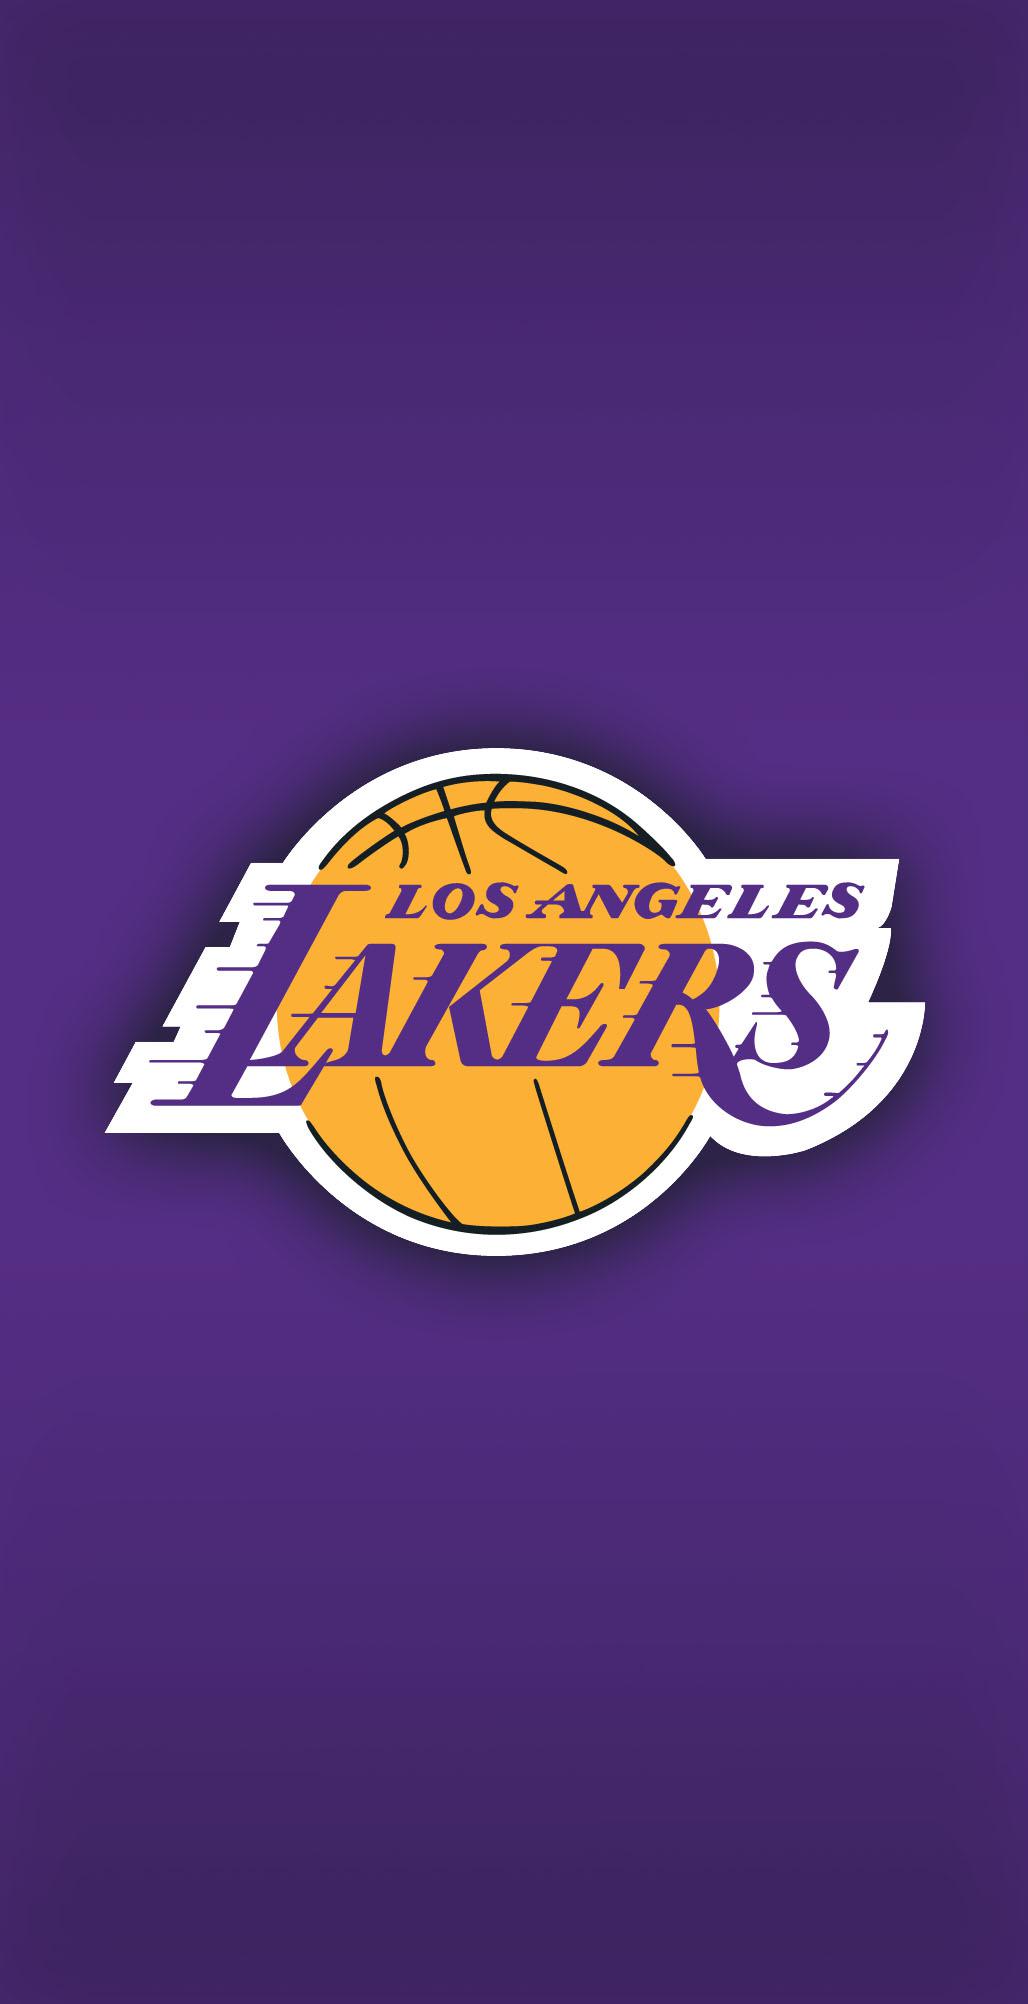 Made this lakers wallpaper for your phone rlakers